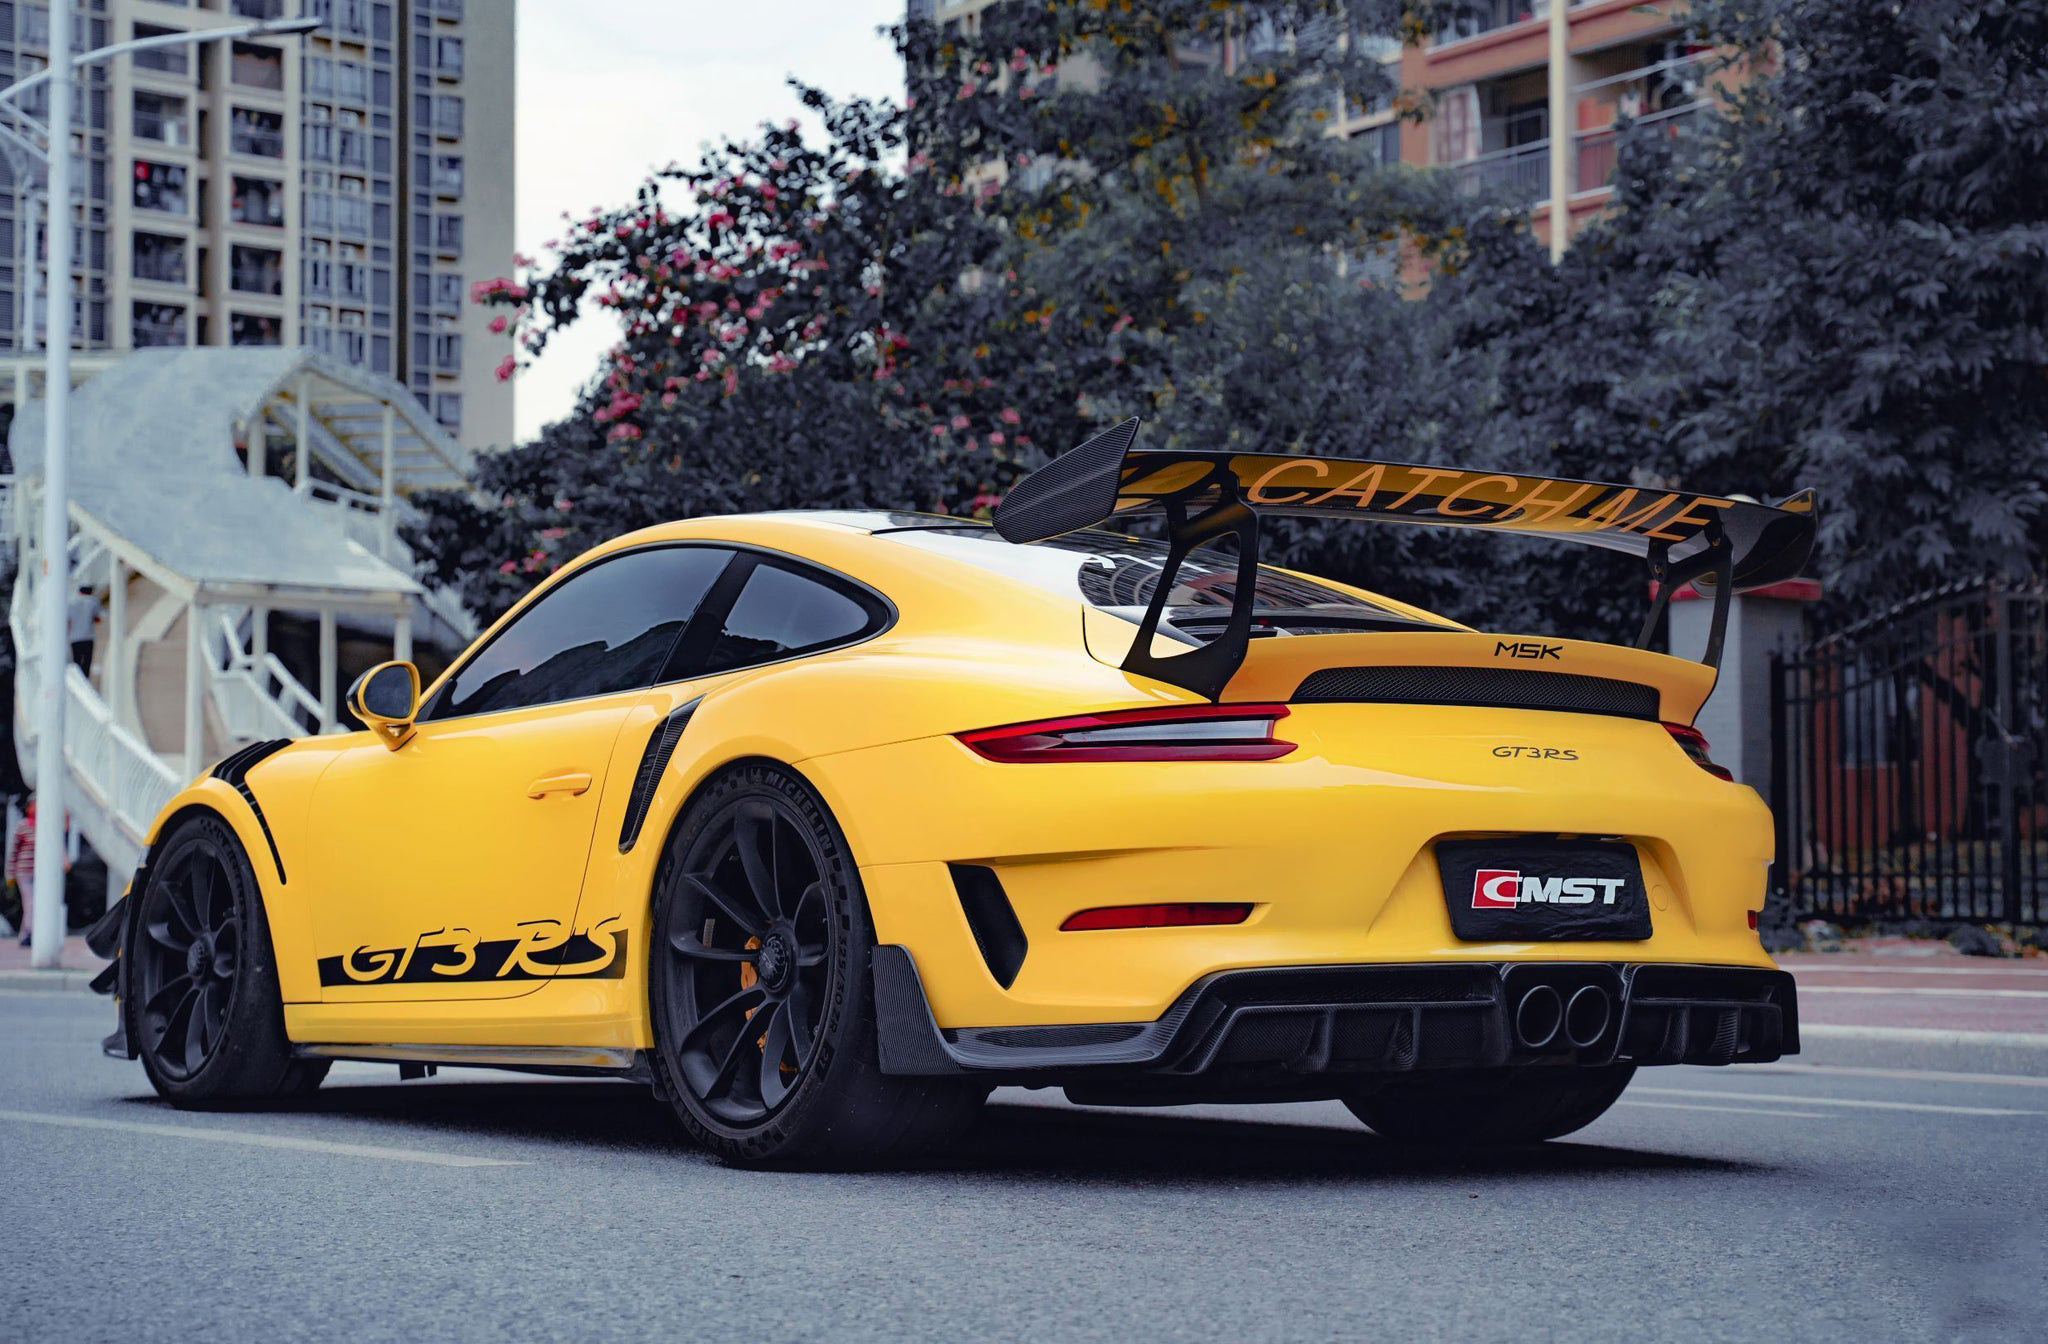 Check our price and buy CMST Carbon Fiber Body Kit set for Porsche 911 991.2 GT3 RS